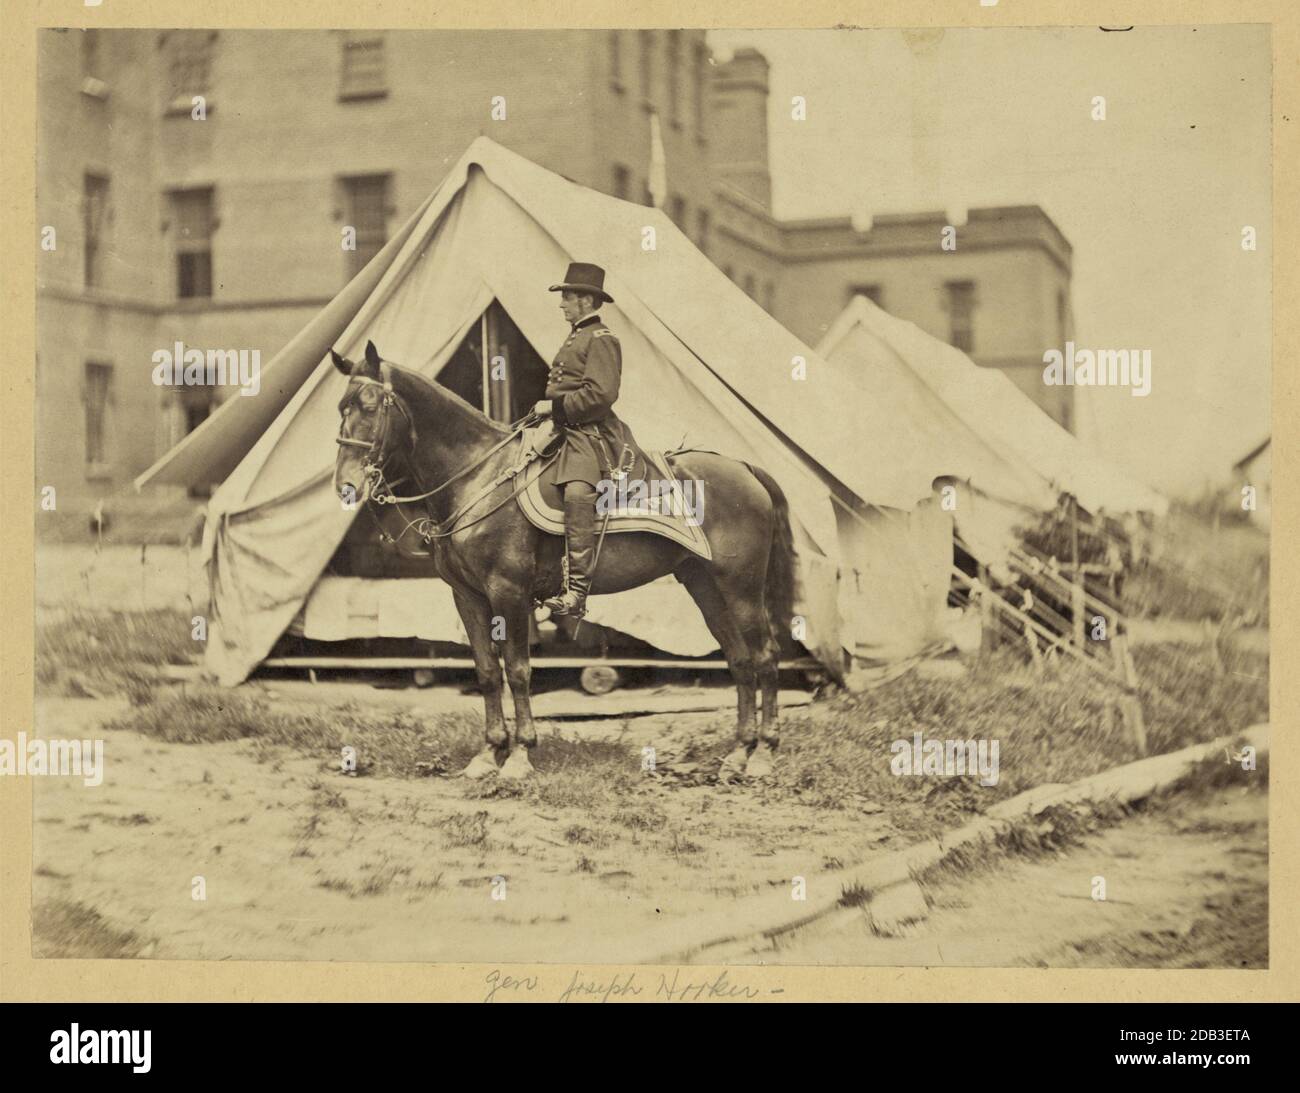 Major-General Joseph Hooker, full-length portrait, seated on horse, facing left, wearing military uniform, two tents and large building in the background. Stock Photo